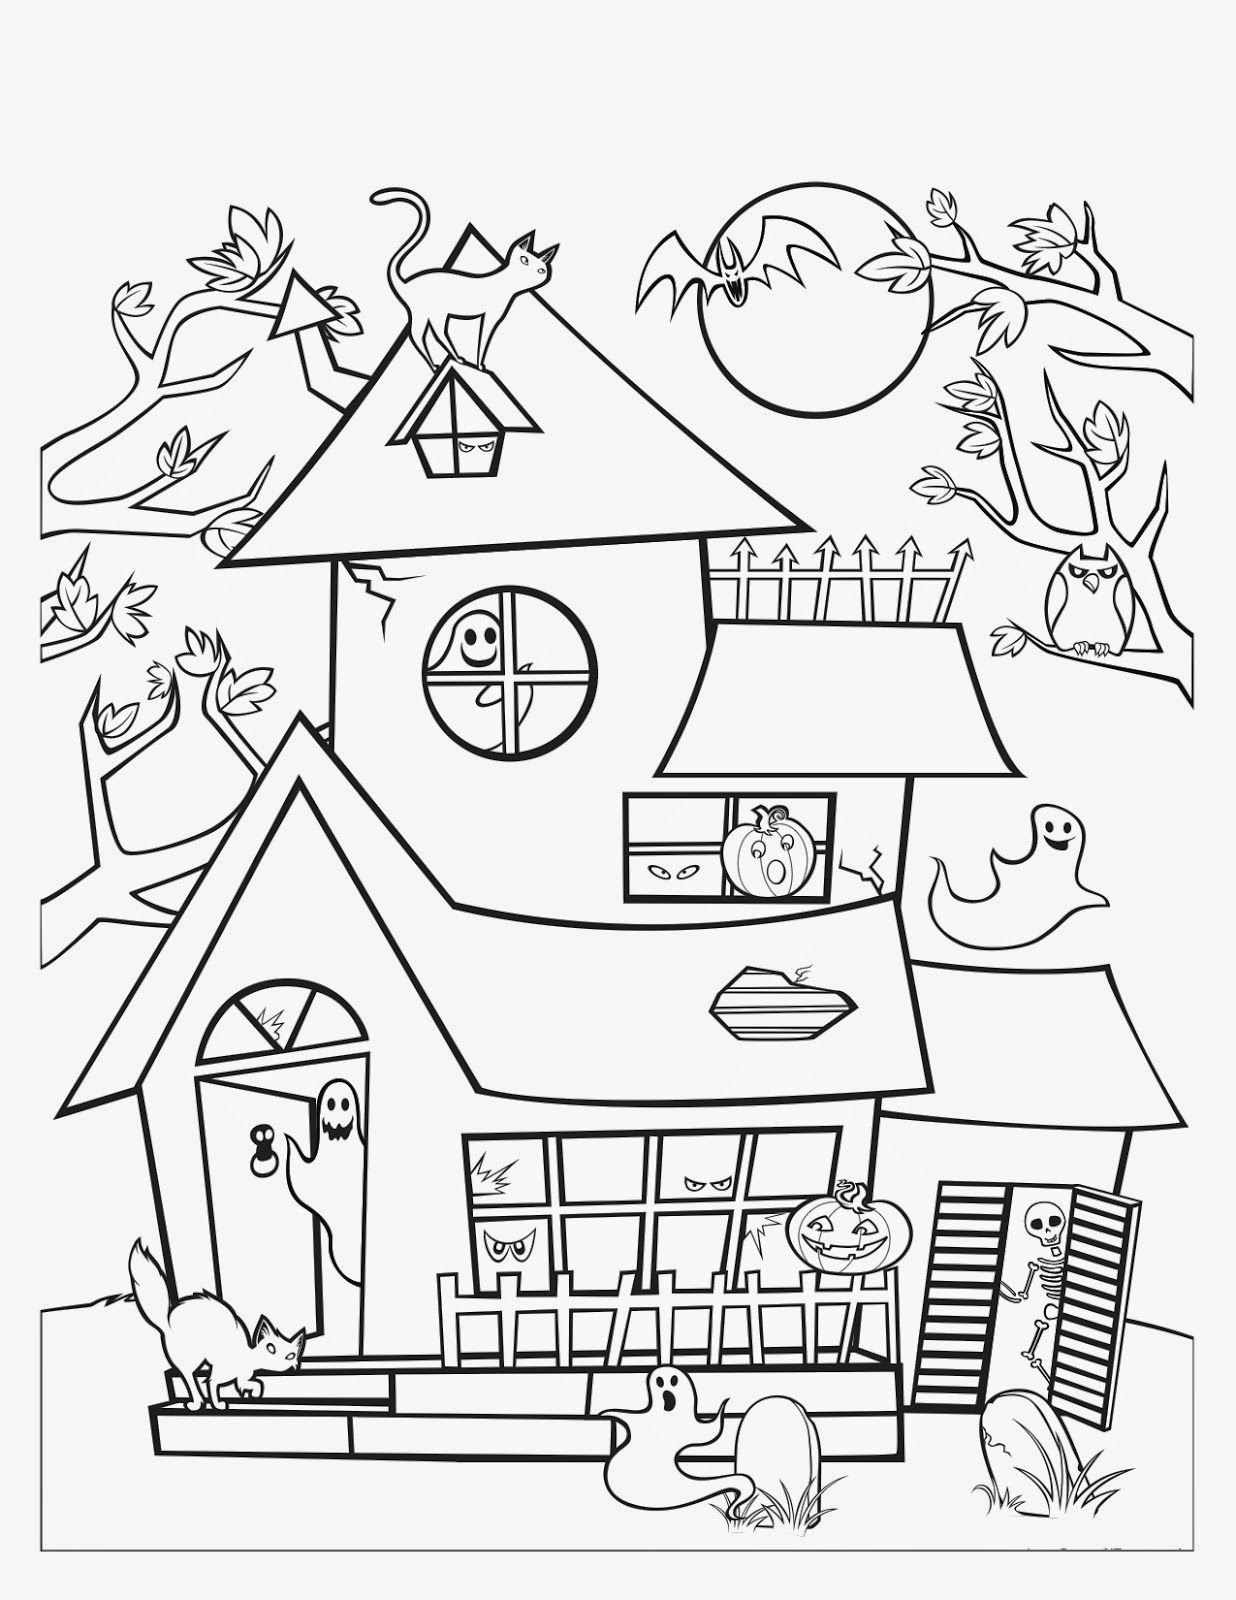 Haunted House Coloring Page Pdf Coloring Pages